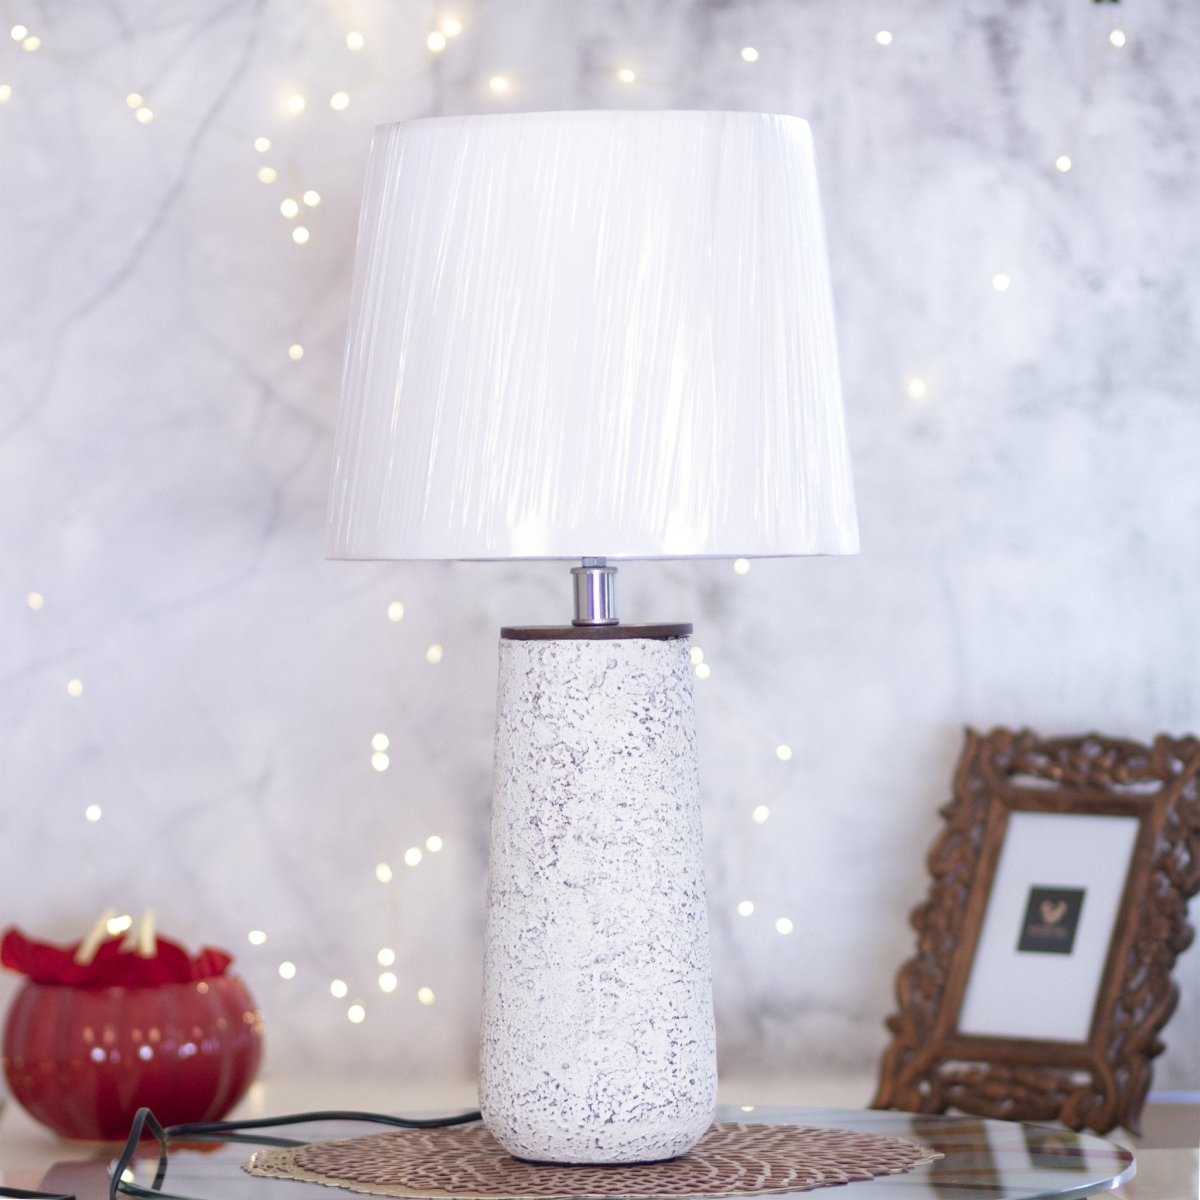 Kezevel Metal Decor Table Lamp - Antique White Finish Textured Side Lamp with Fabric Shade, Table Lamps for Home Decoration, Size 31.75X31.75X60.96CM - Kezevel